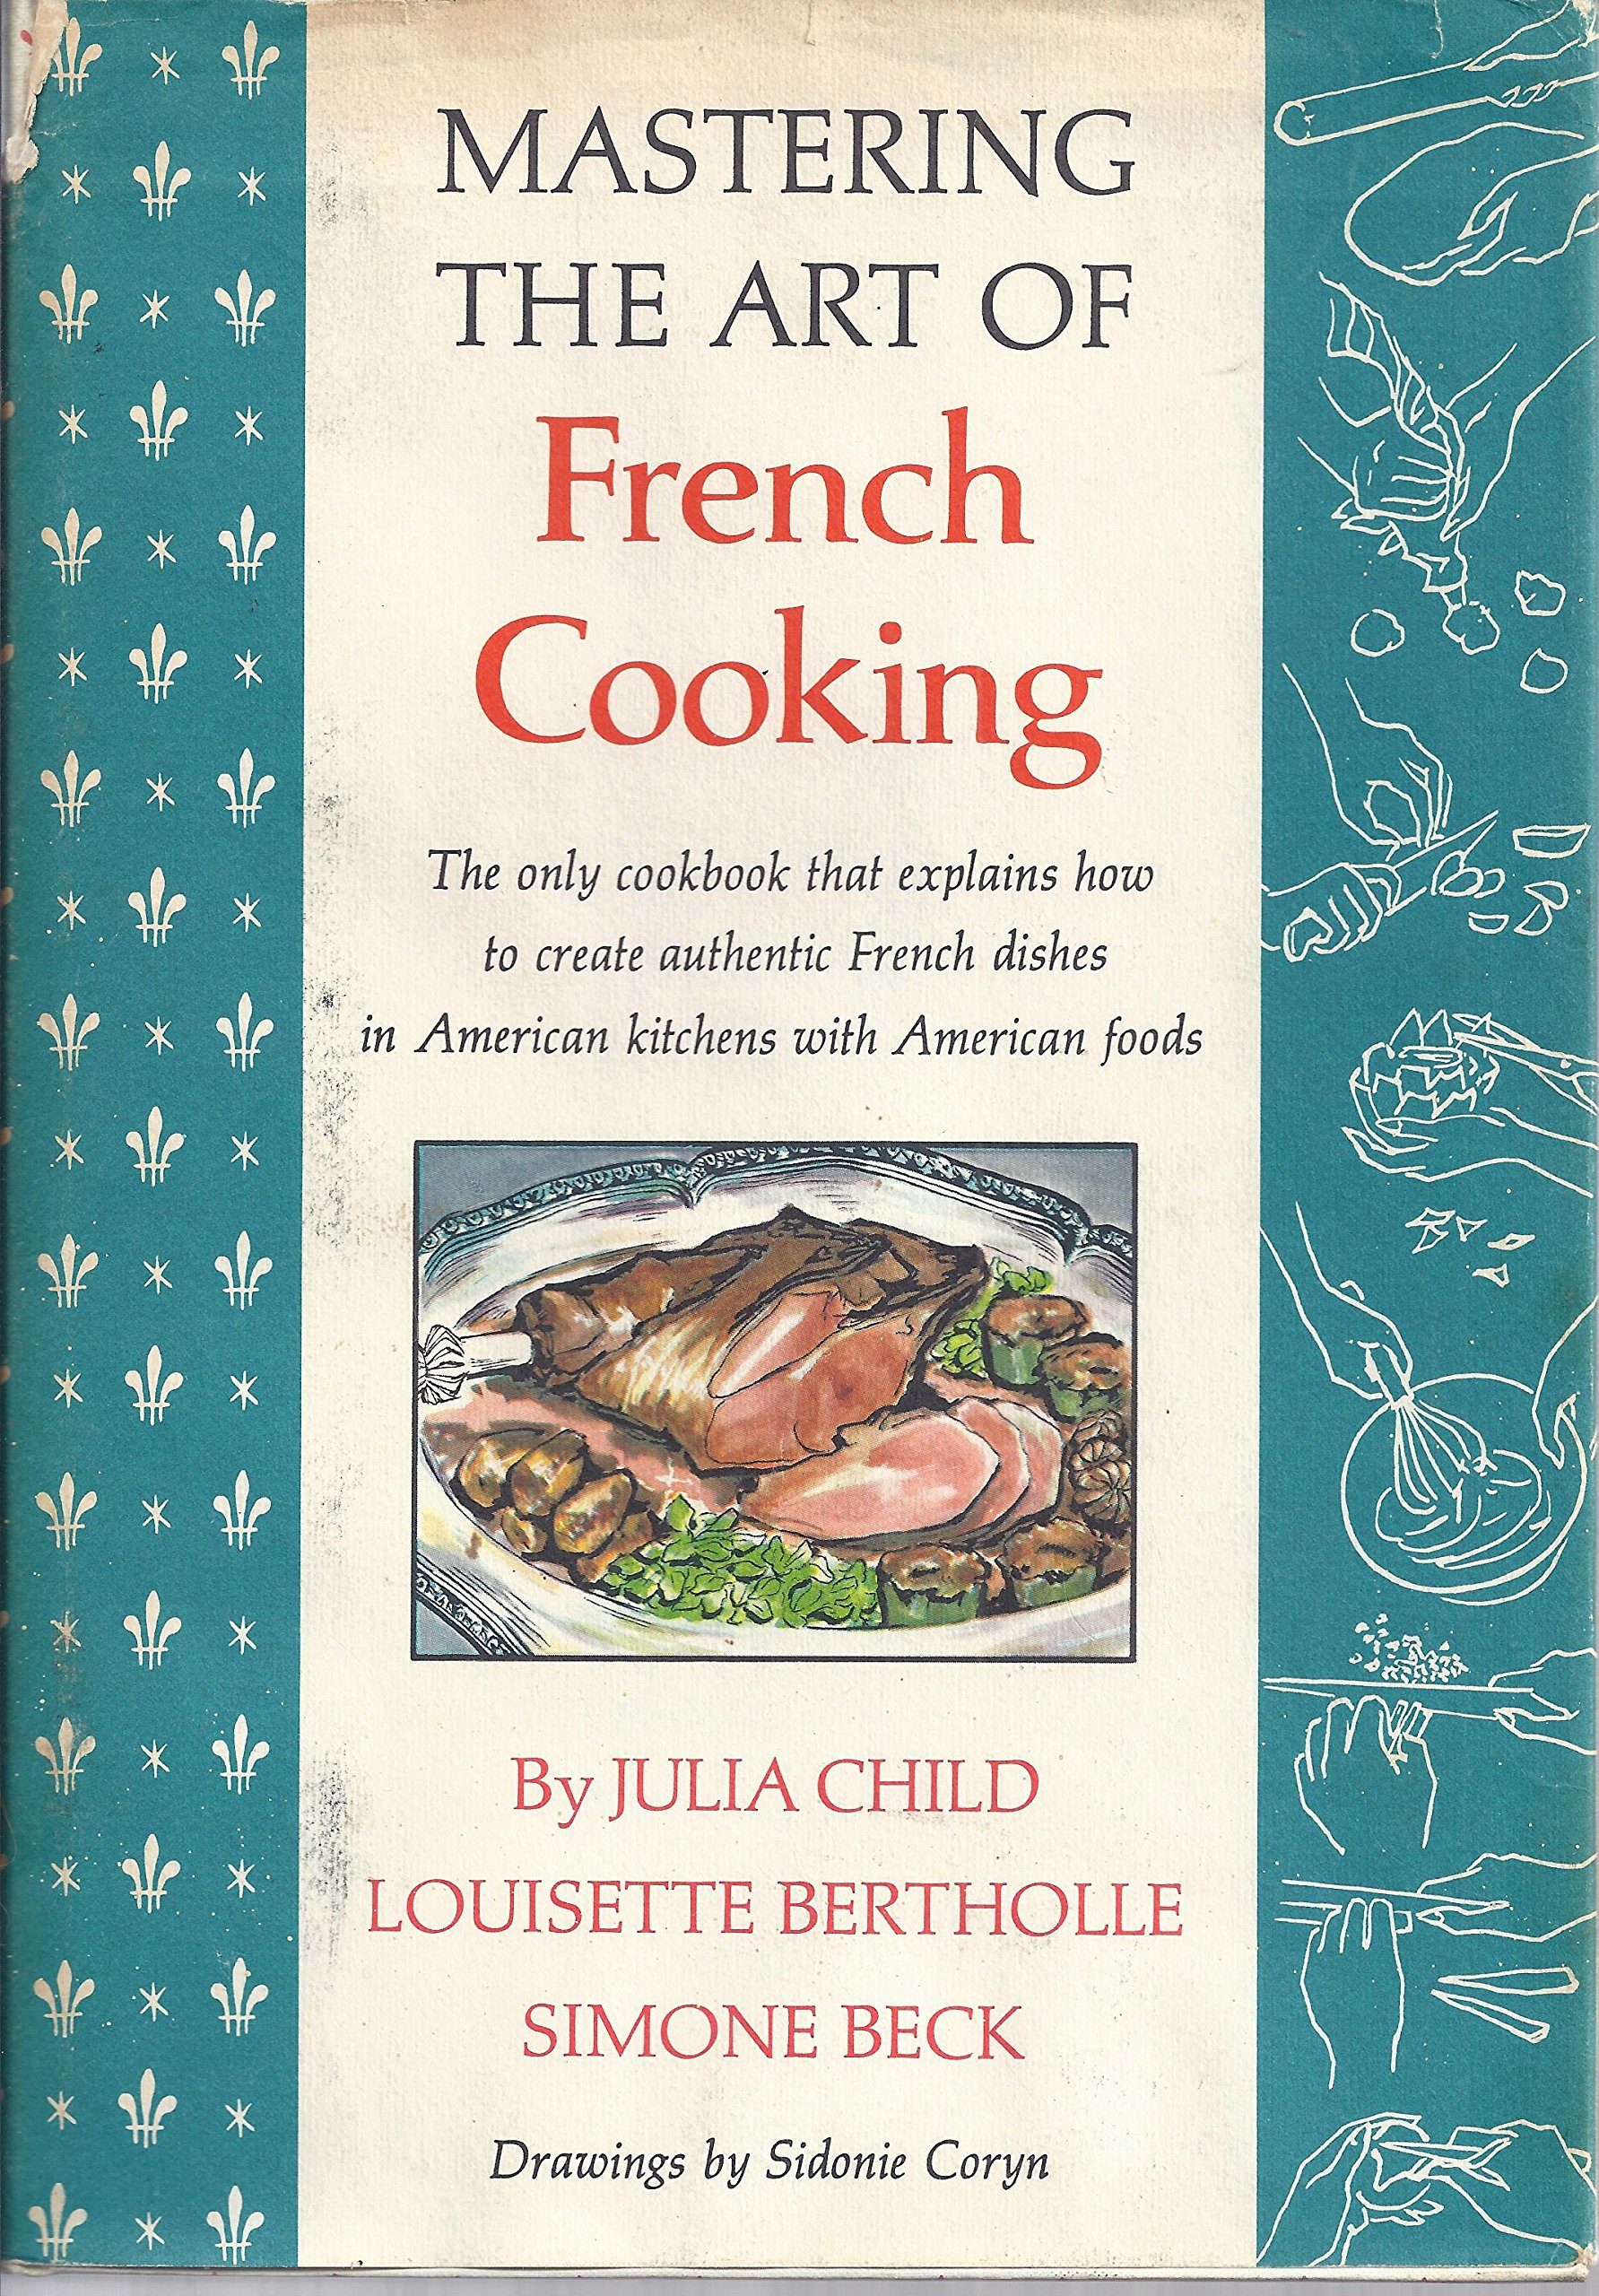 Mastering the Art of French Cooking by Julia Child 